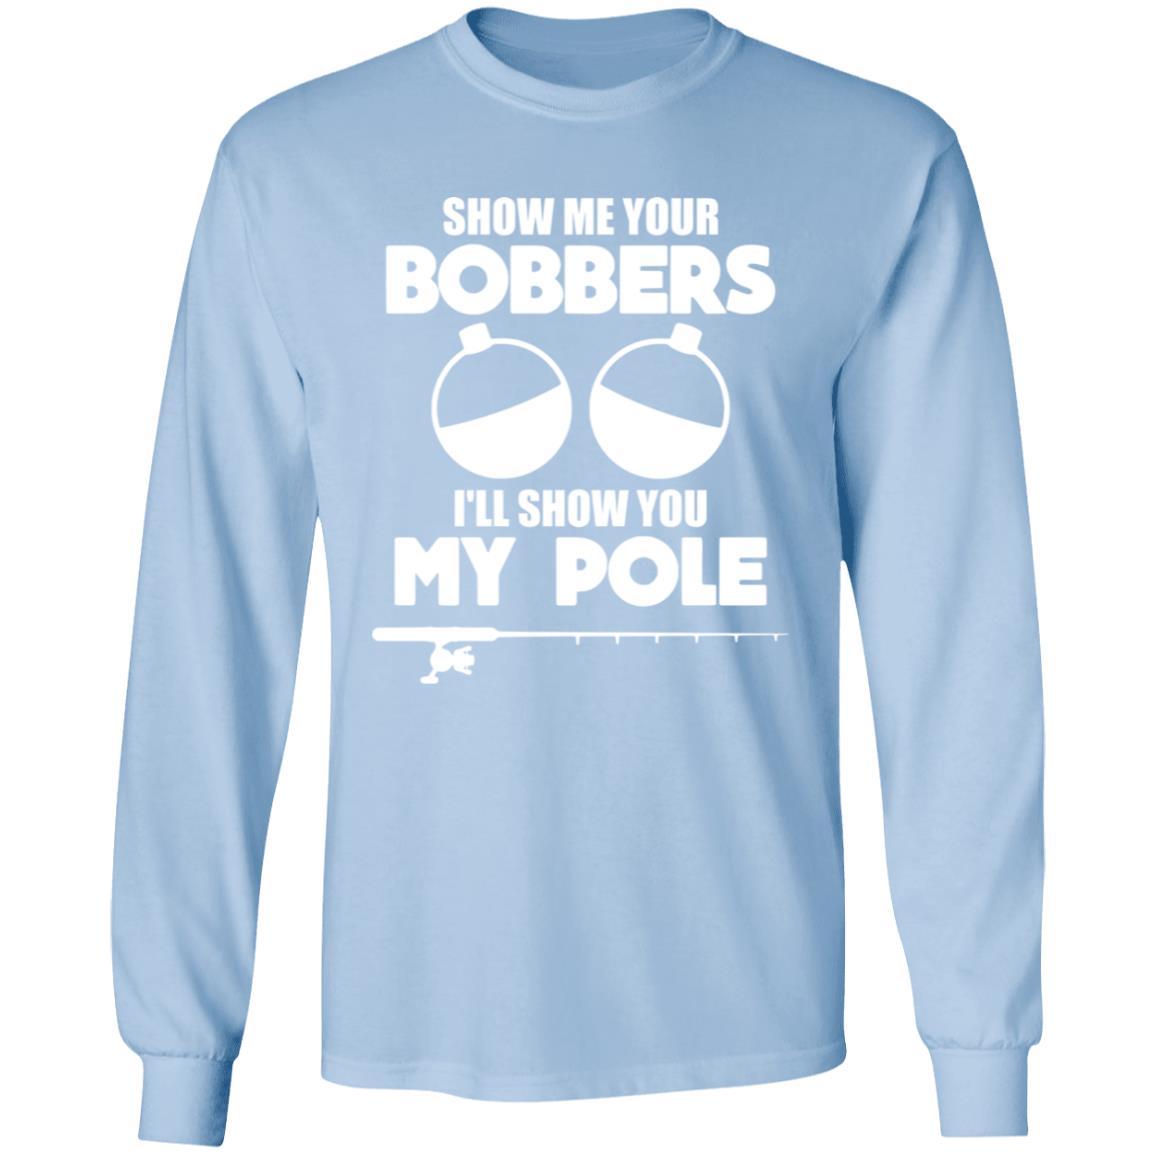 HRCL FL - Show Me Your Bobbers I'll Show You My Pole - 2 Sided G540 LS T-Shirt 5.3 oz.